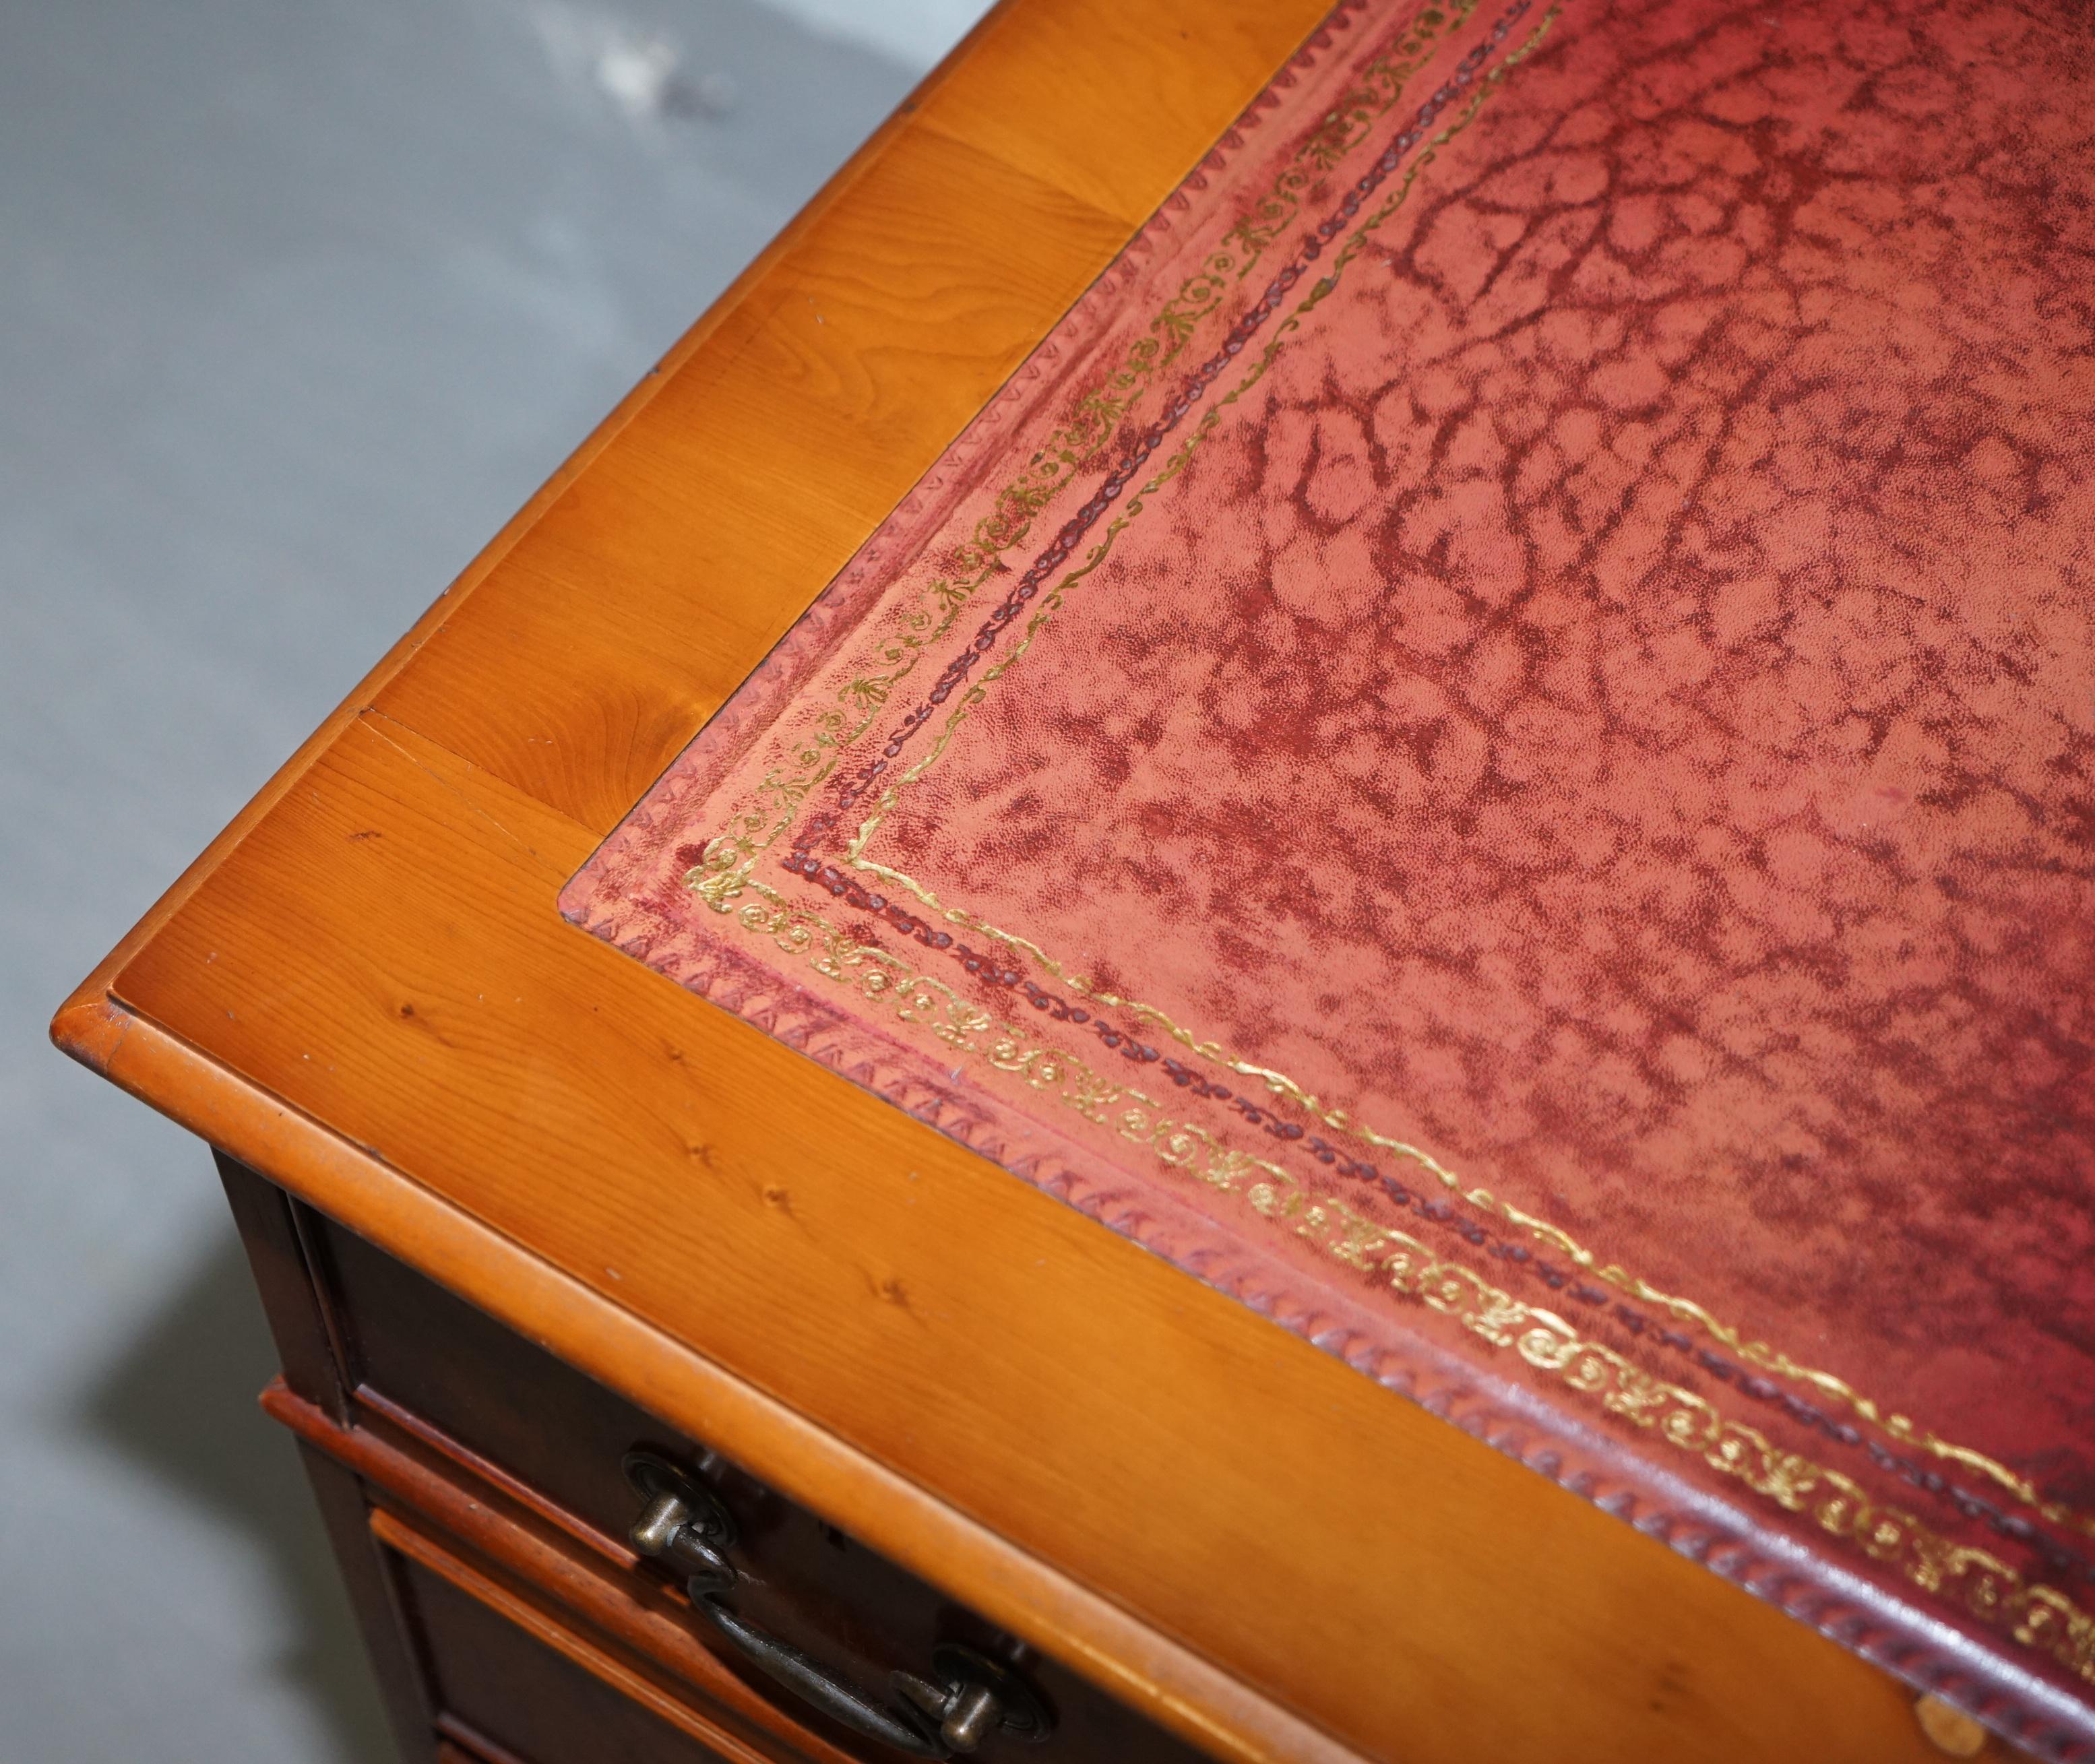 Stunning Vintage Burr Walnut Partners Desk with Oxblood Leather Writing Surface 7